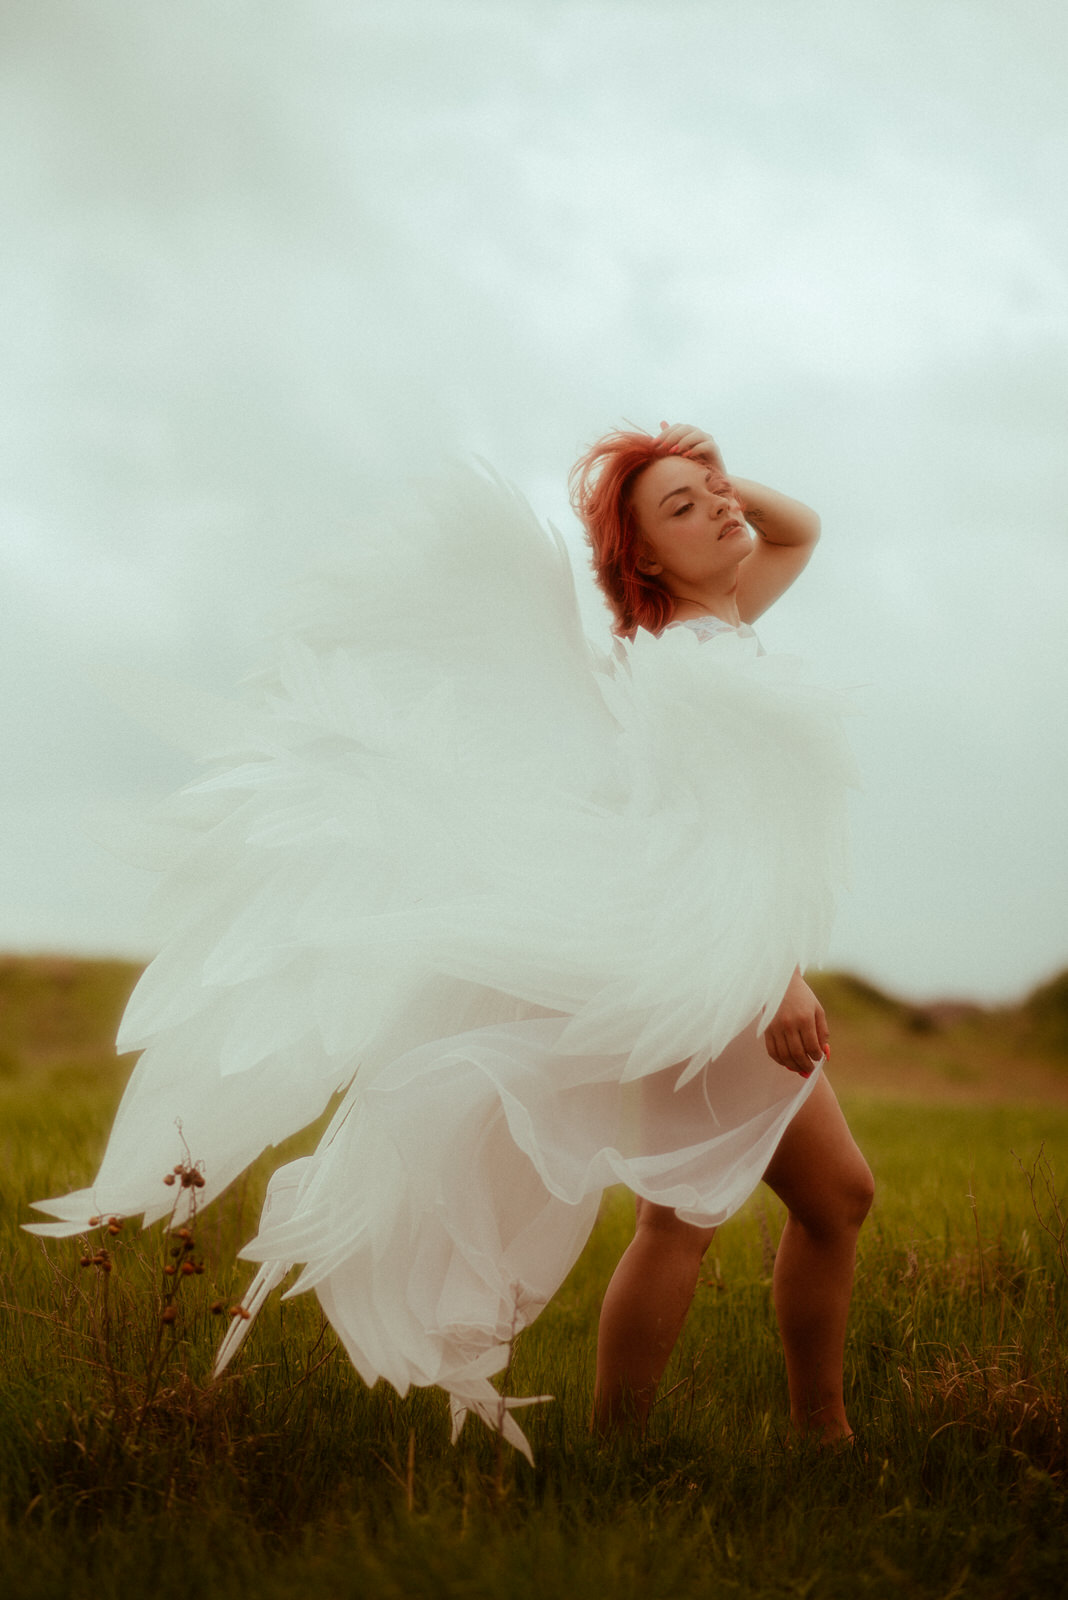 Beautiful angel wings photoshoot outdoors in Dallas, TX